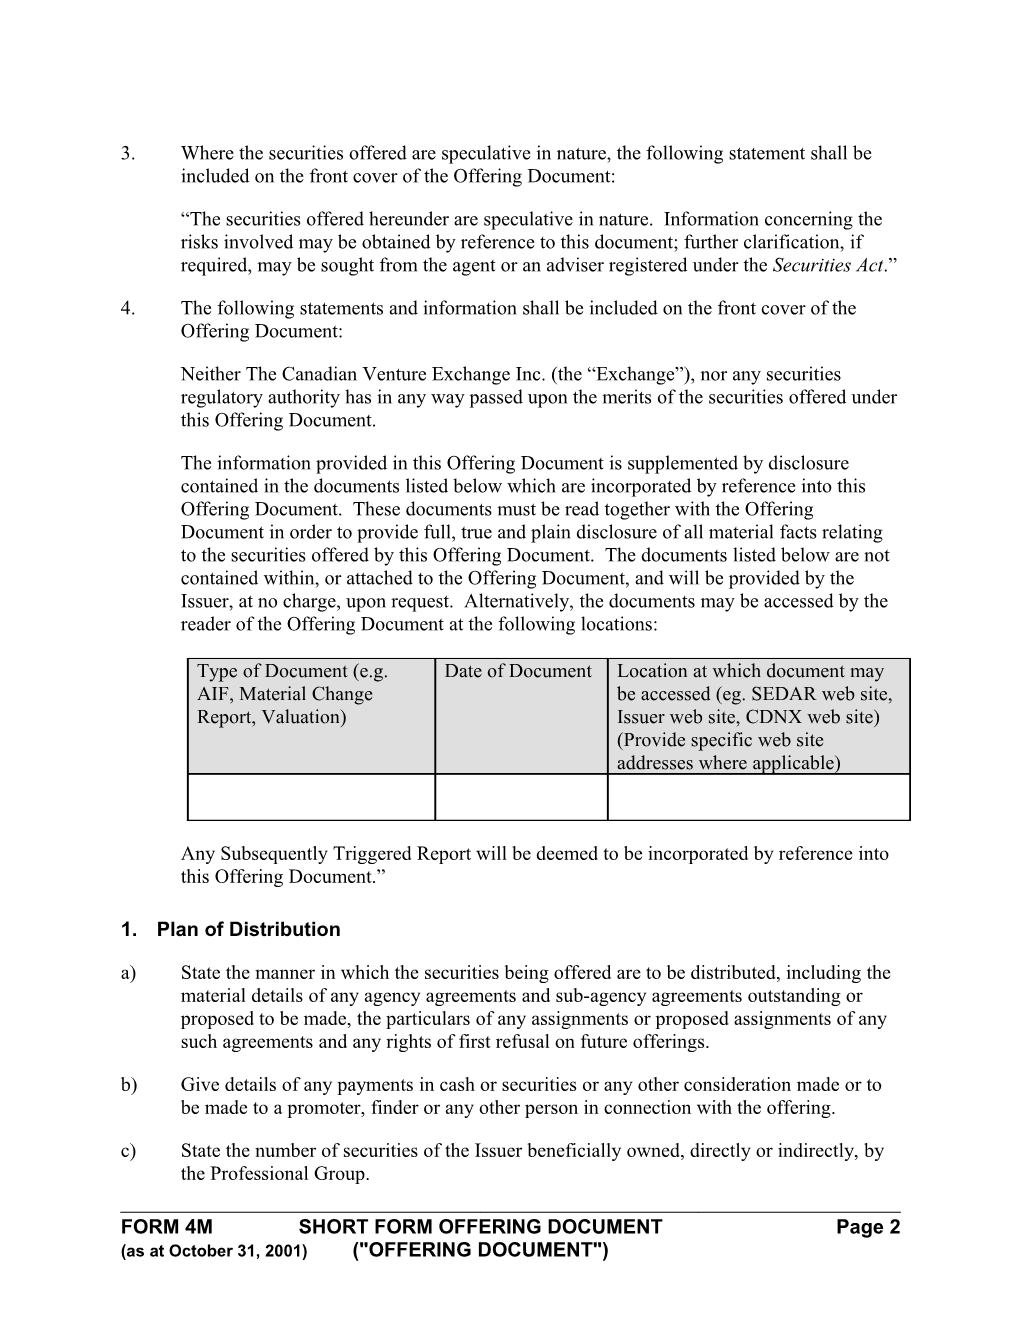 Short Form Offering Document ( Offering Document )